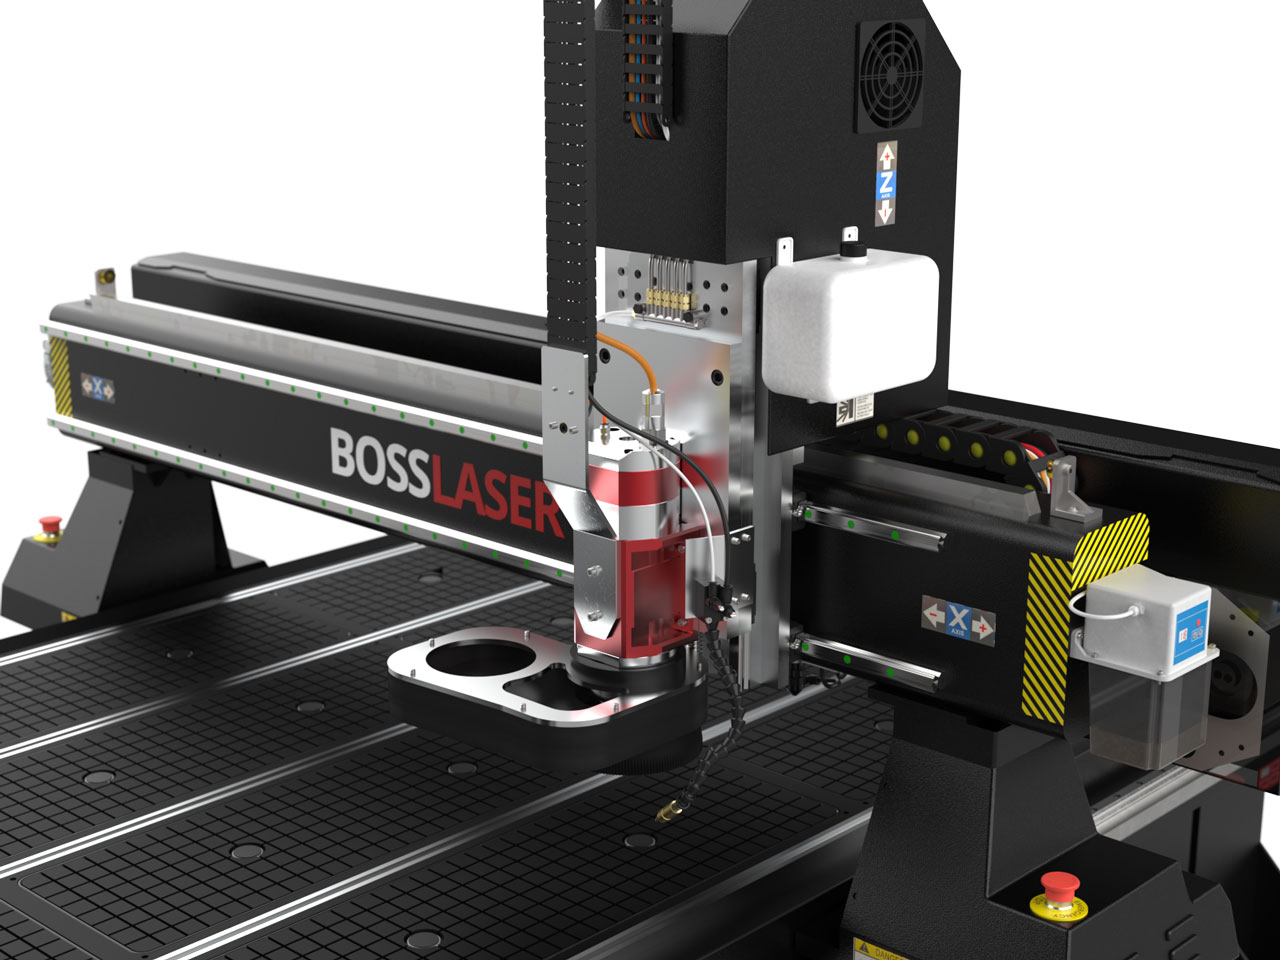 Boss LSR Hybrid CNC & CO2 Laser Combo - up to 12 Horsepower CNC Spindle Available